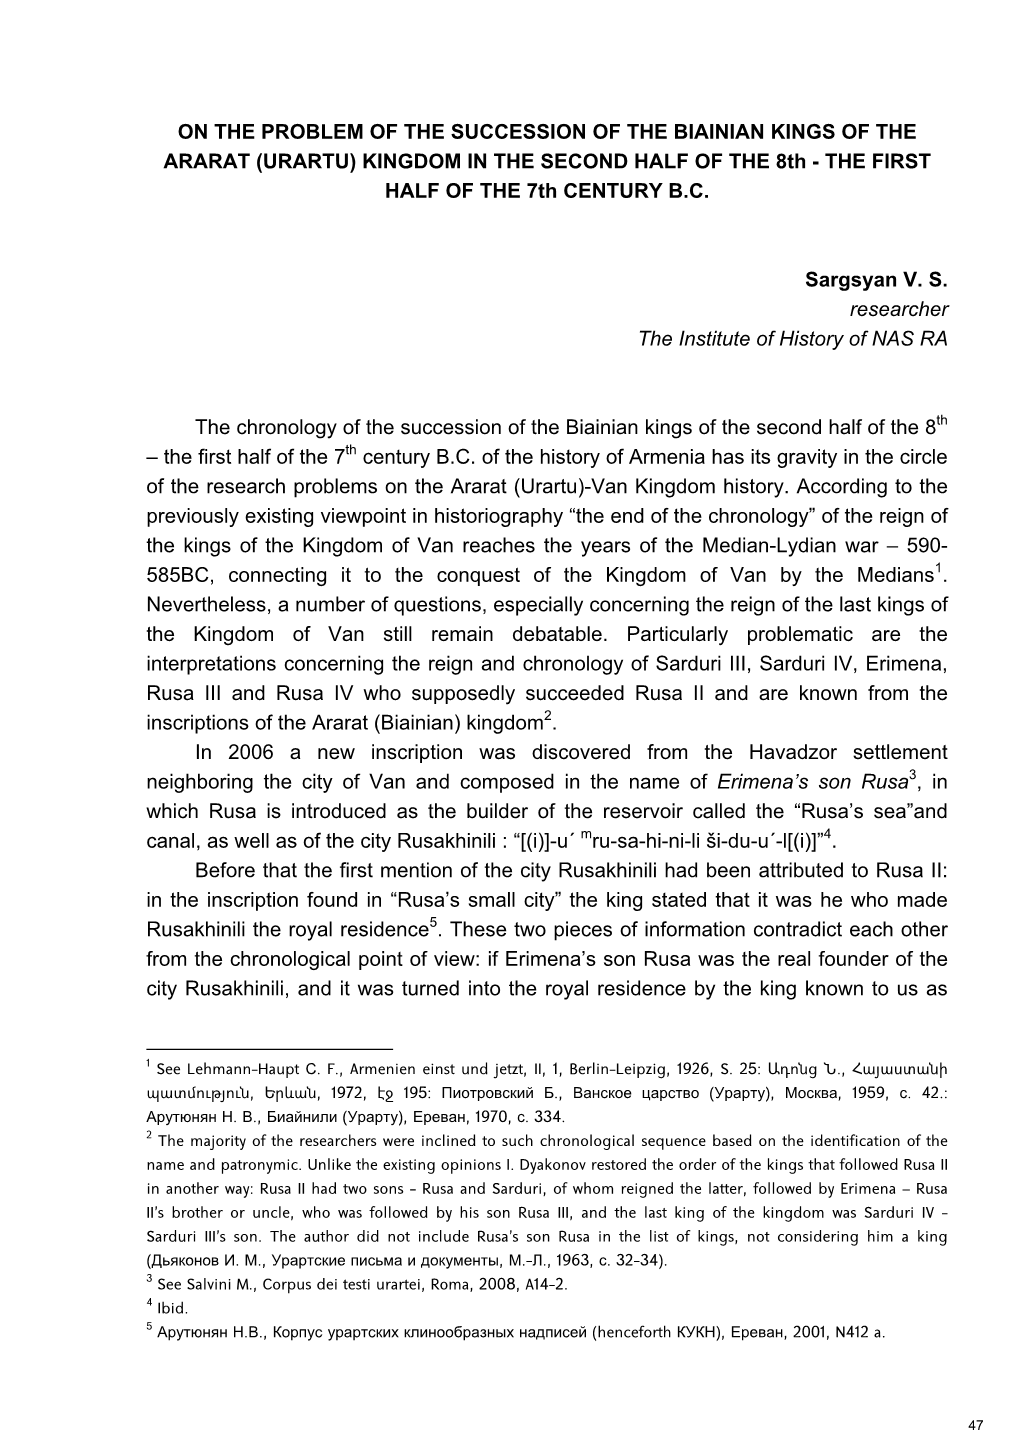 ON the PROBLEM of the SUCCESSION of the BIAINIAN KINGS of the ARARAT (URARTU) KINGDOM in the SECOND HALF of the 8Th - the FIRST HALF of the 7Th CENTURY B.C